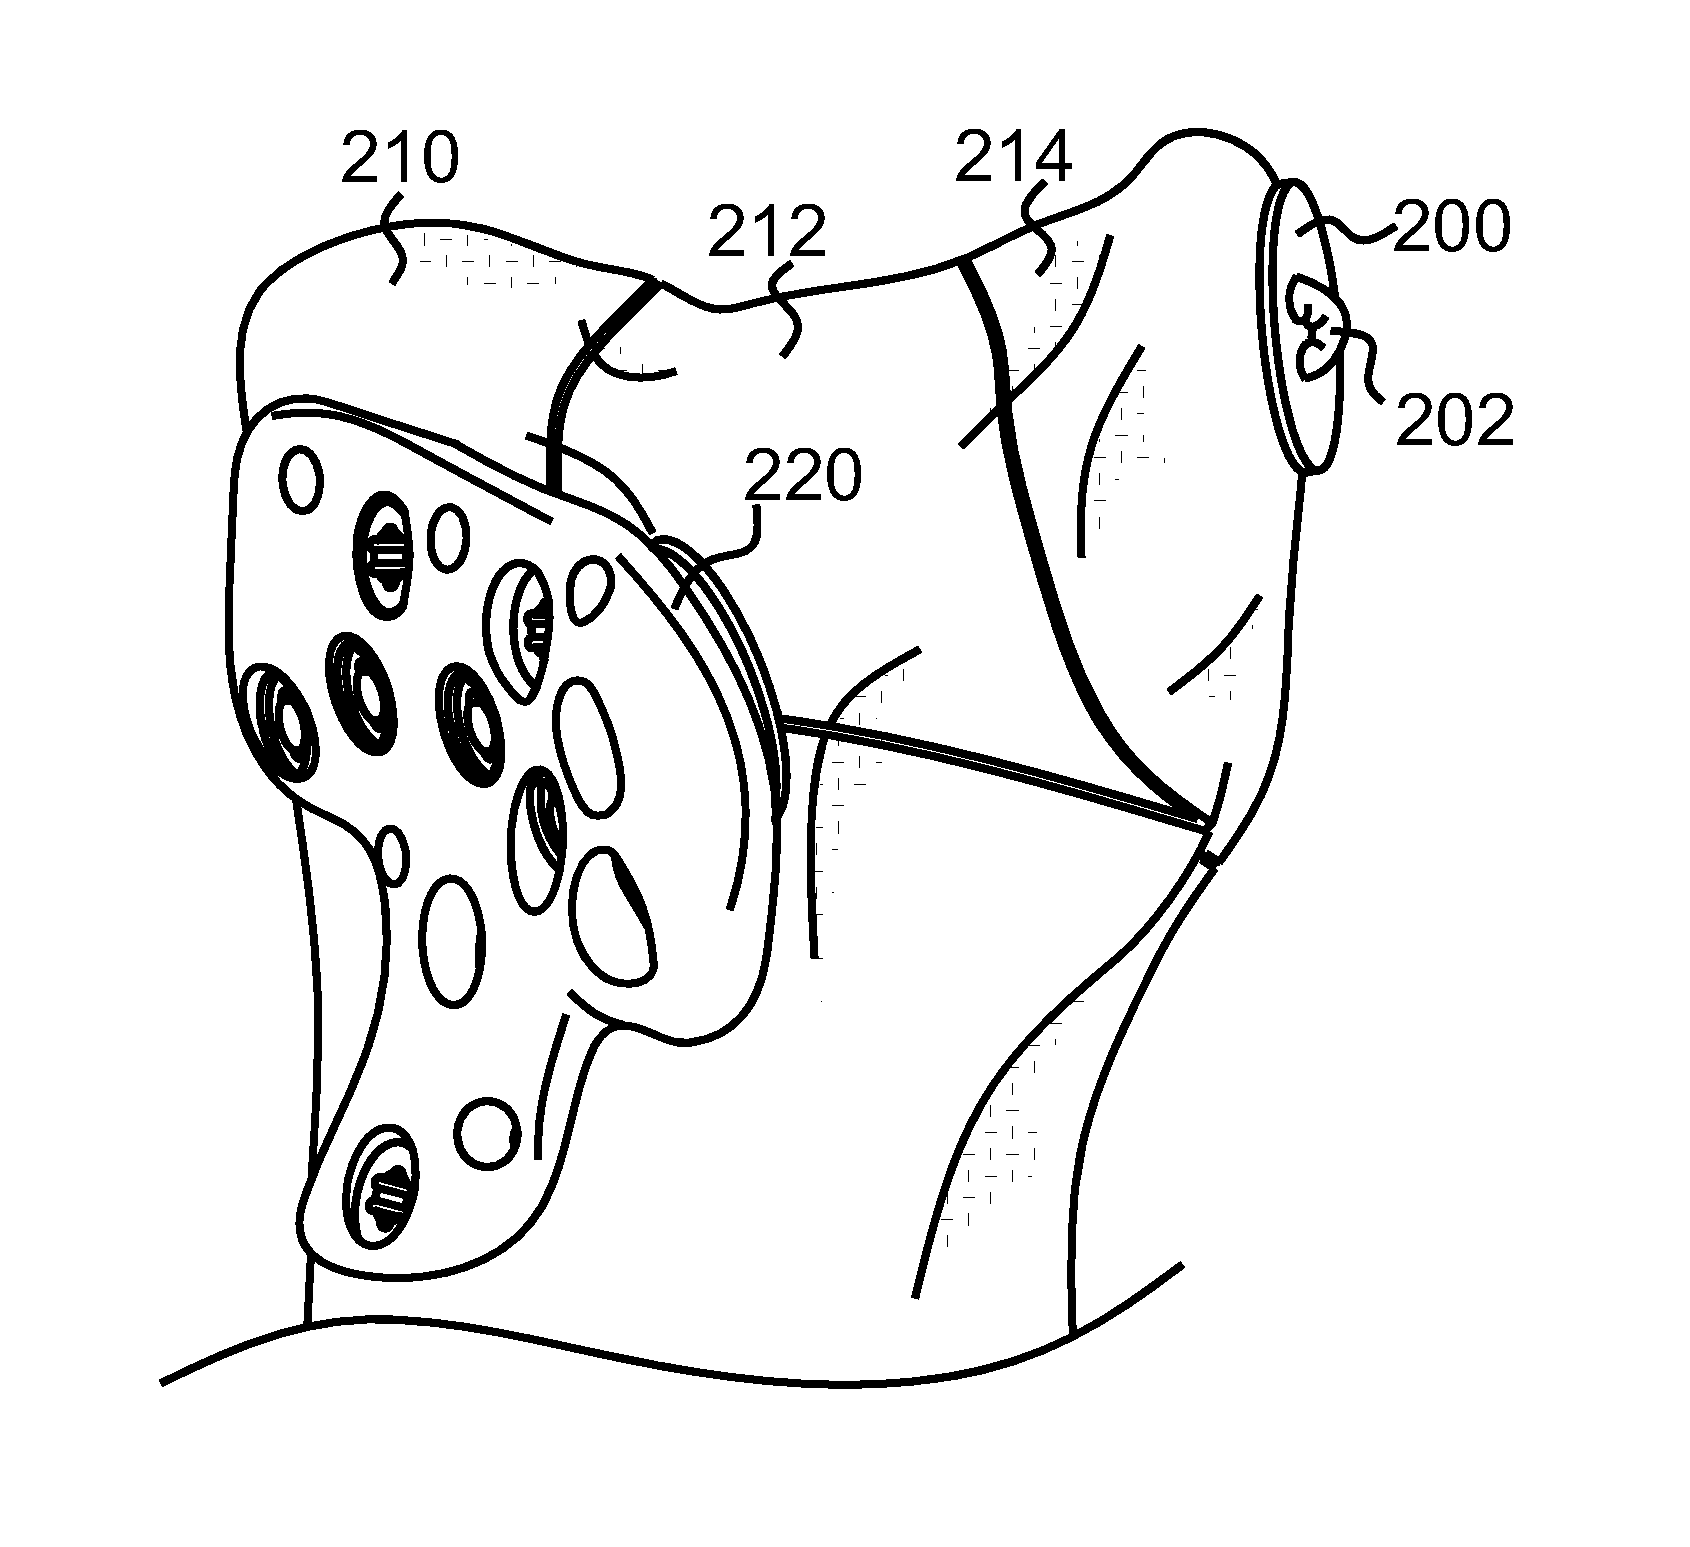 Atraumatic fastener and bone stabilization system and method of use